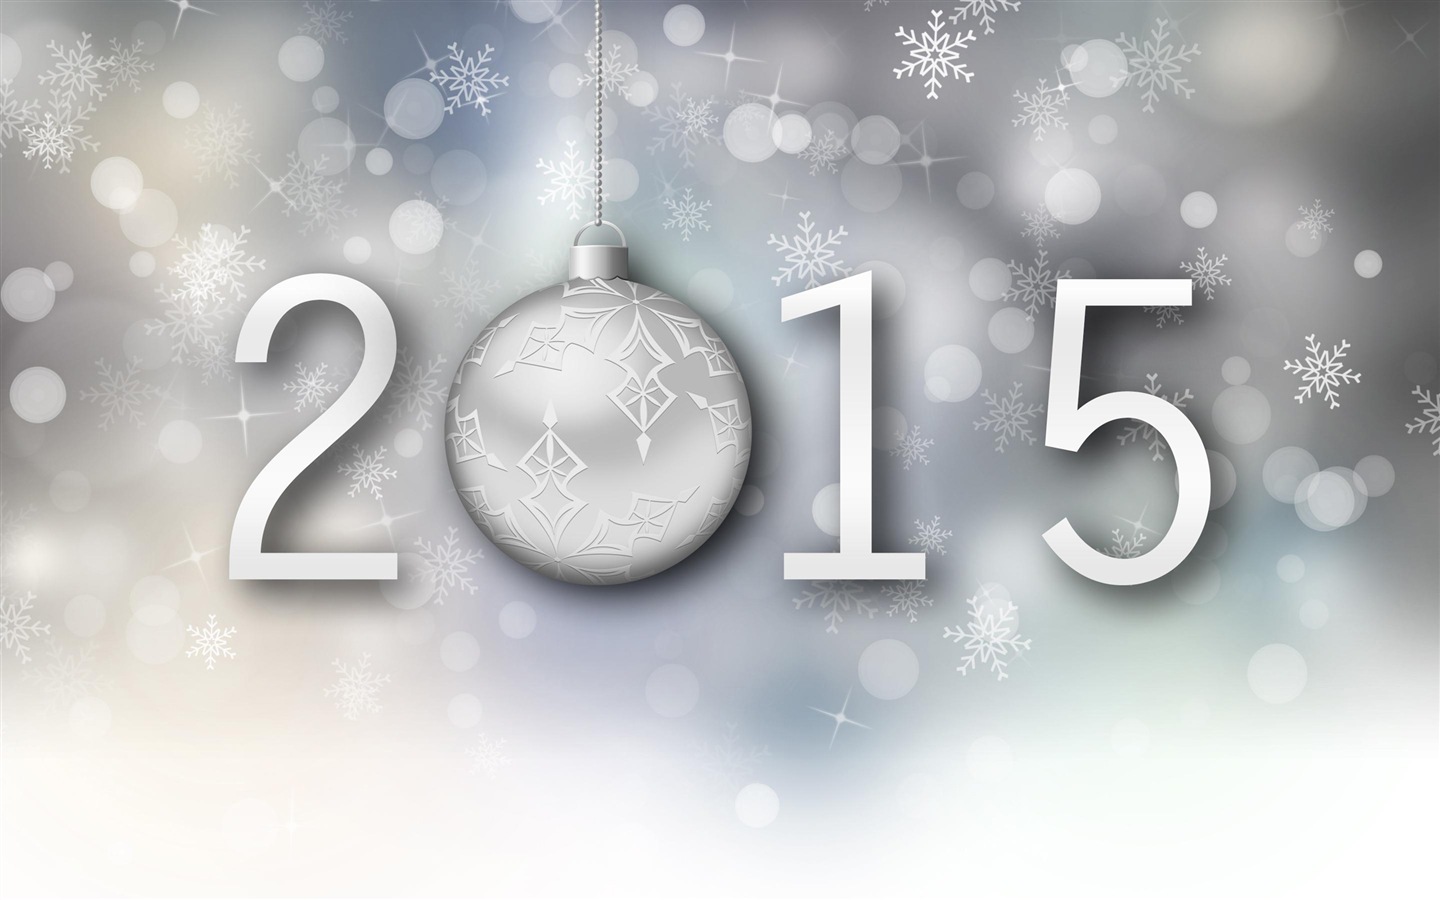 2015 New Year theme HD wallpapers (1) #4 - 1440x900